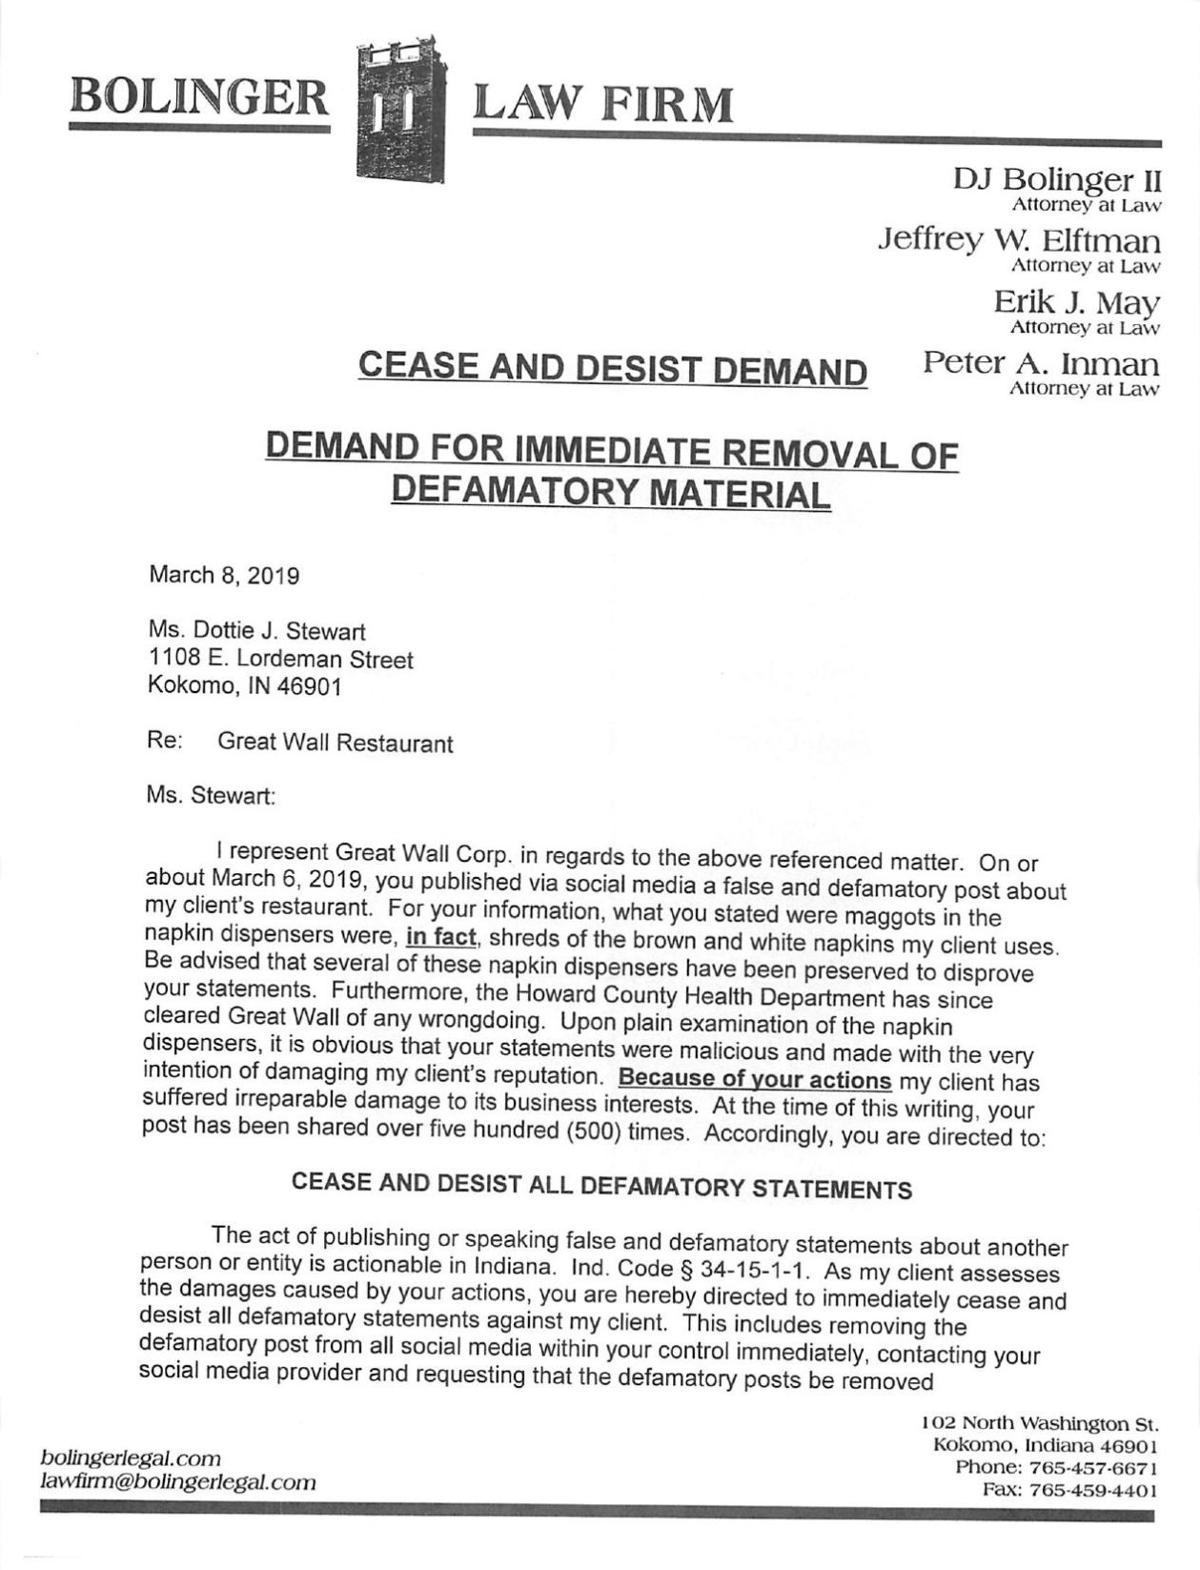 Legal Cease And Desist Letter from bloximages.chicago2.vip.townnews.com